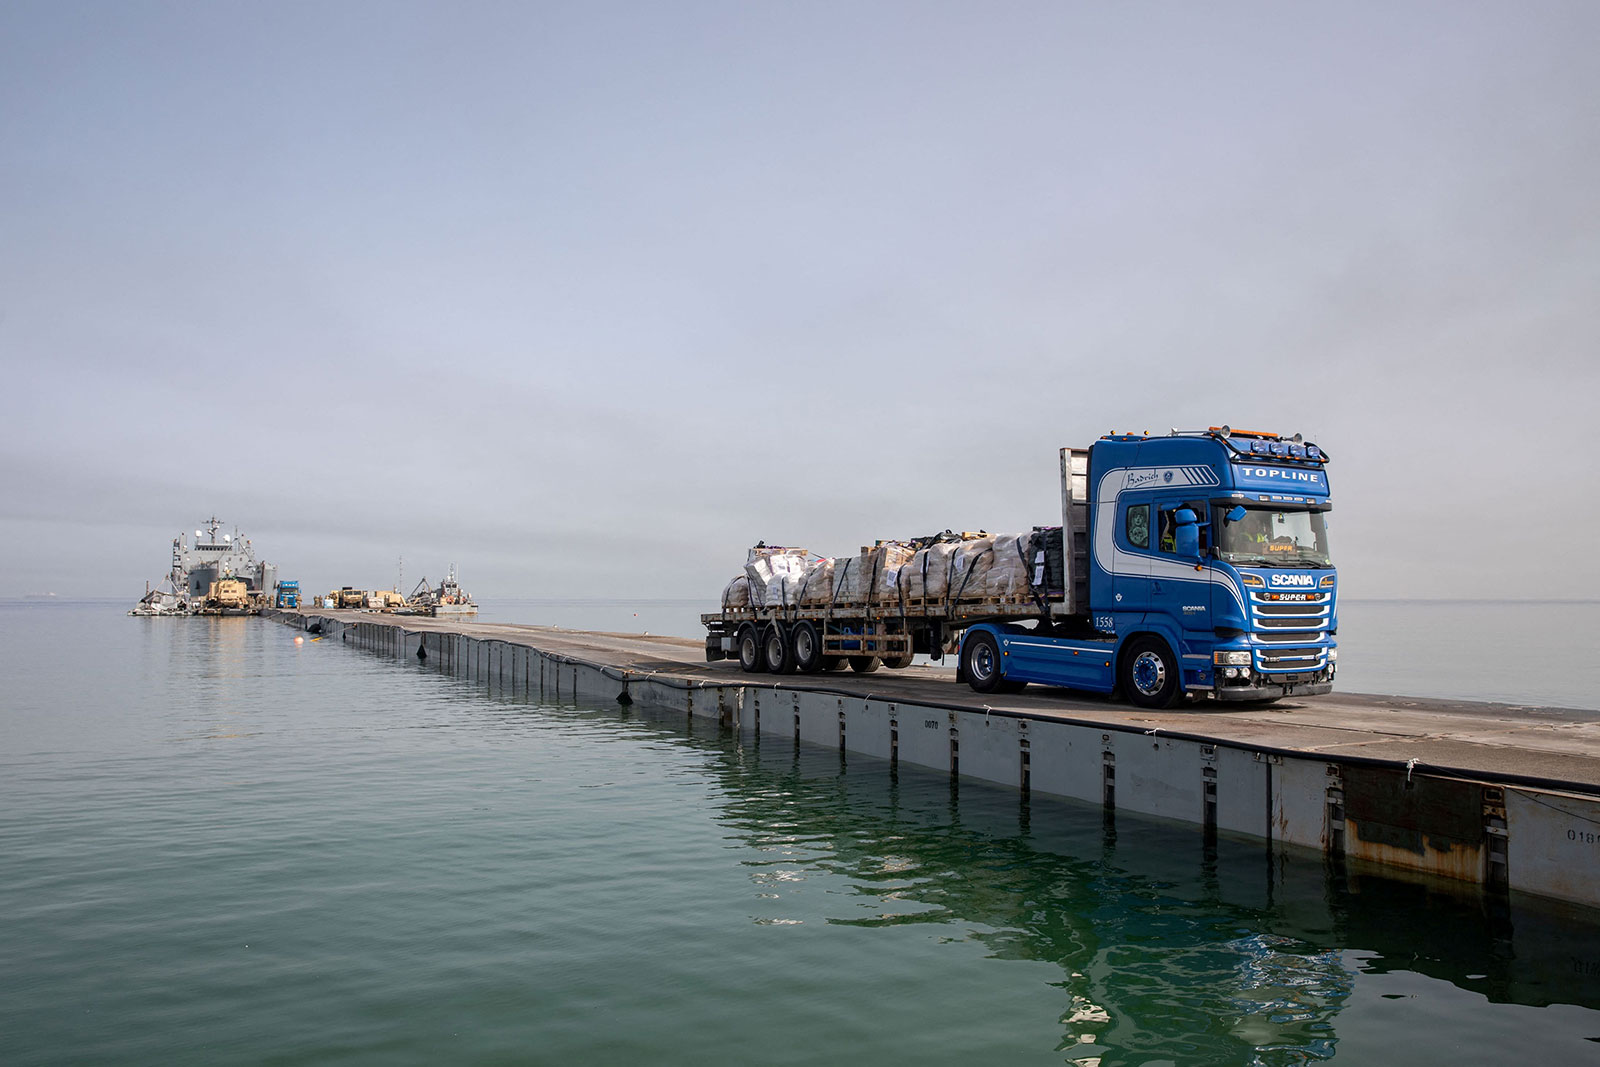 A truck carries humanitarian aid across Trident Pier, a temporary pier to deliver aid, off of Gaza on May 19.